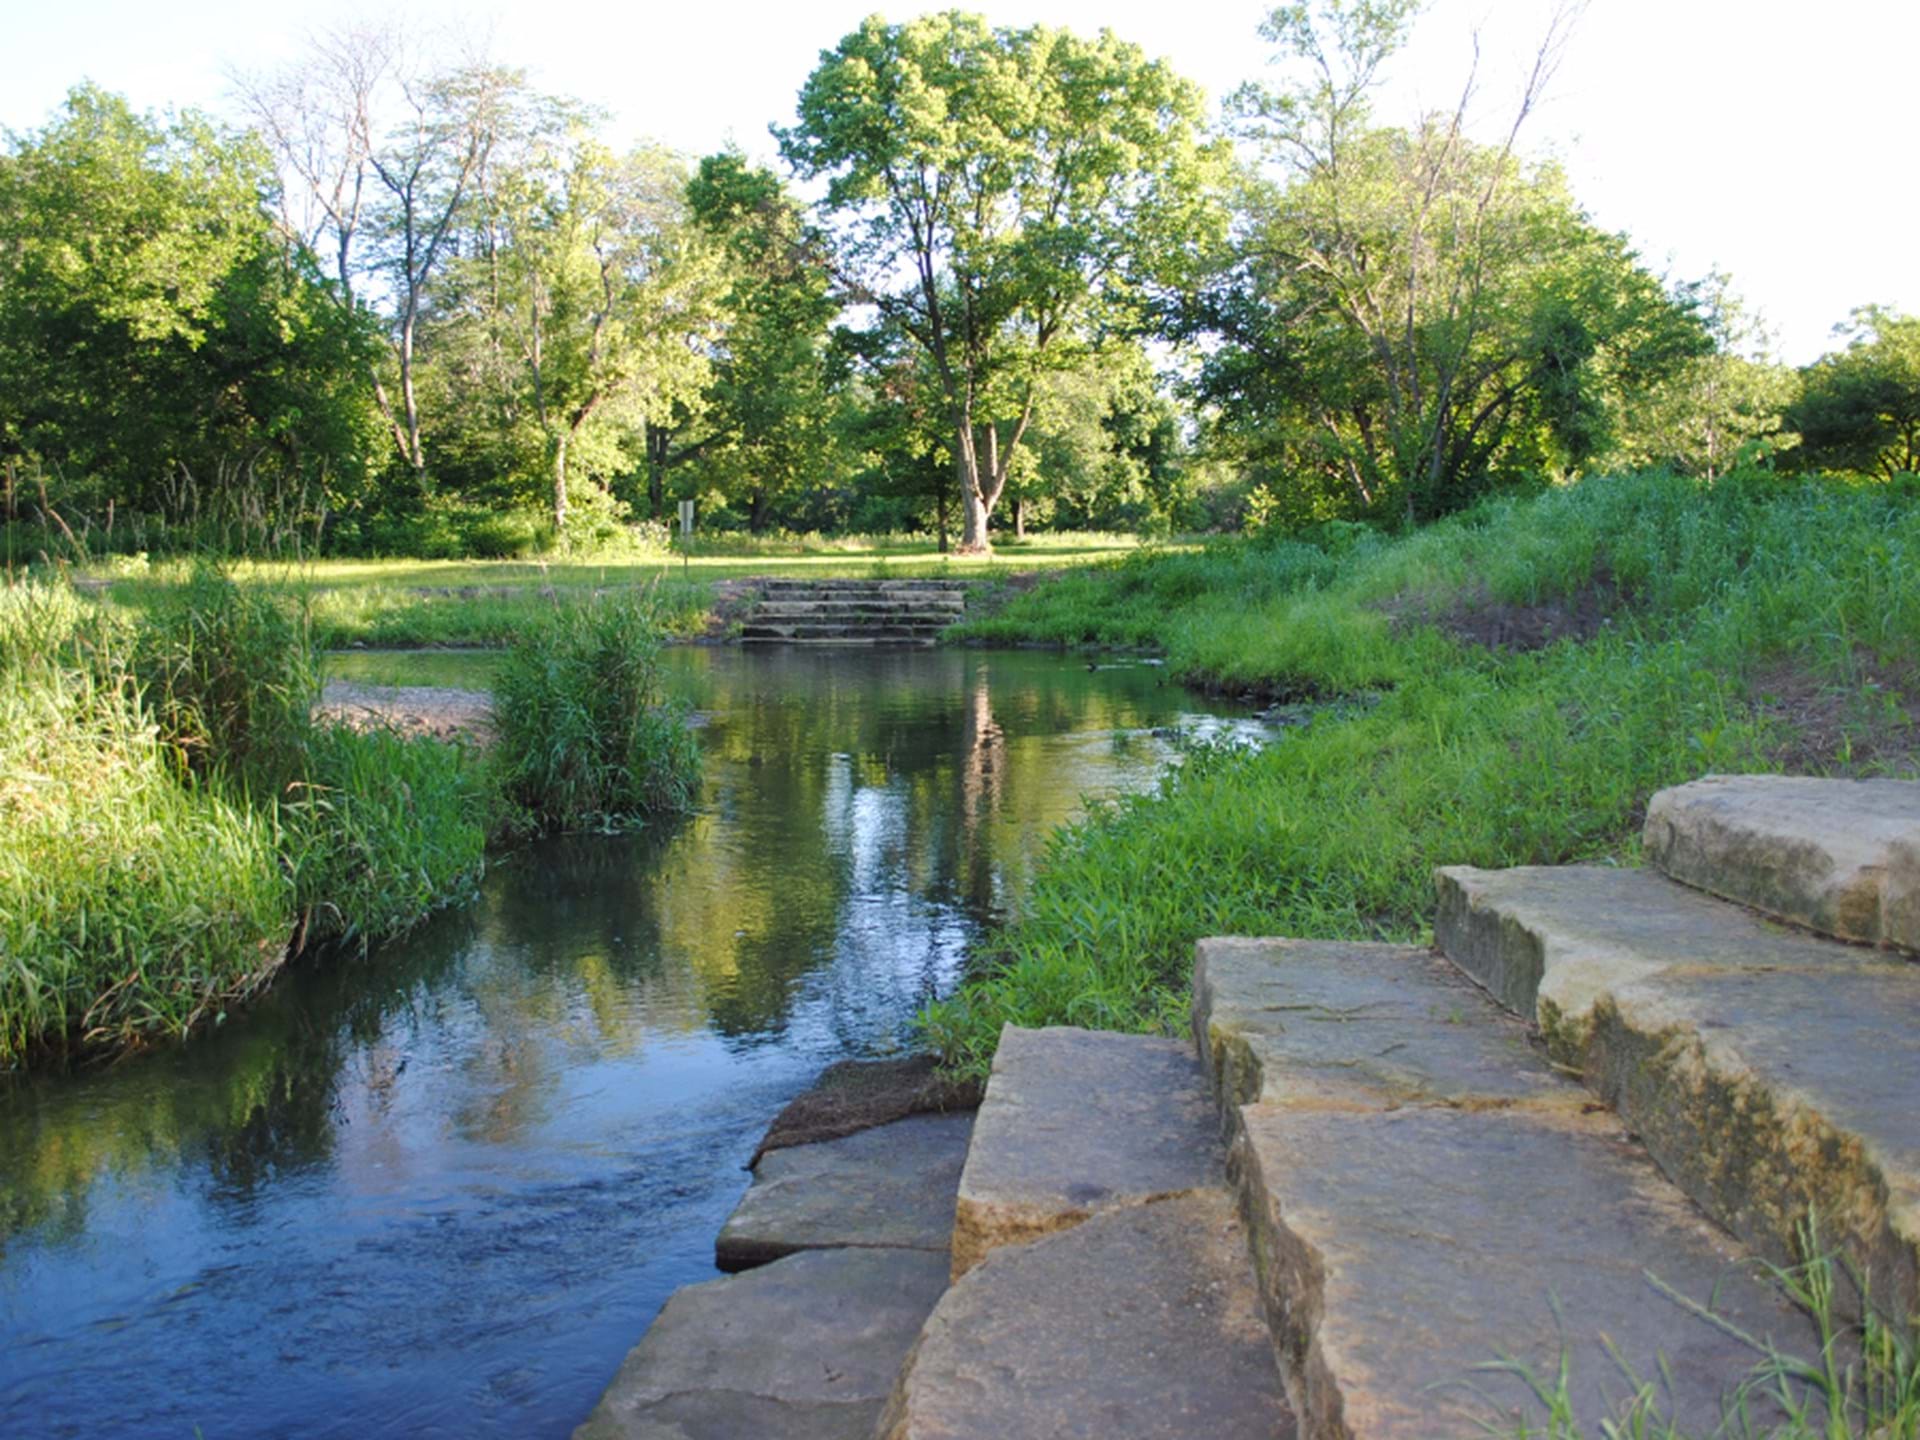 A Guide to Thomas Mitchell Park - Des Moines Outdoors